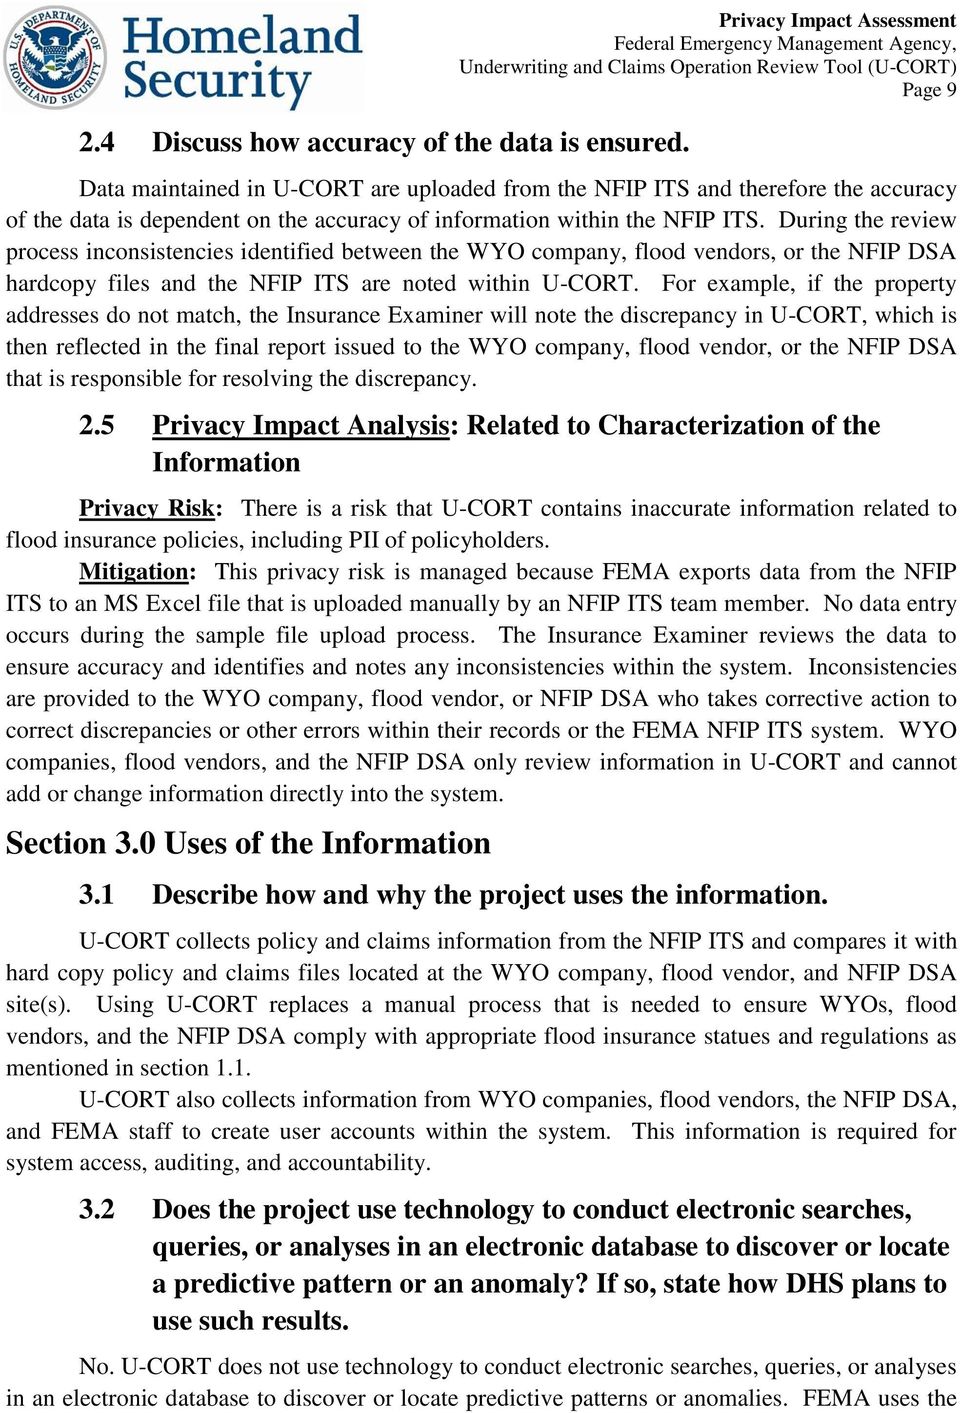 During the review process inconsistencies identified between the WYO company, flood vendors, or the NFIP DSA hardcopy files and the NFIP ITS are noted within U-CORT.